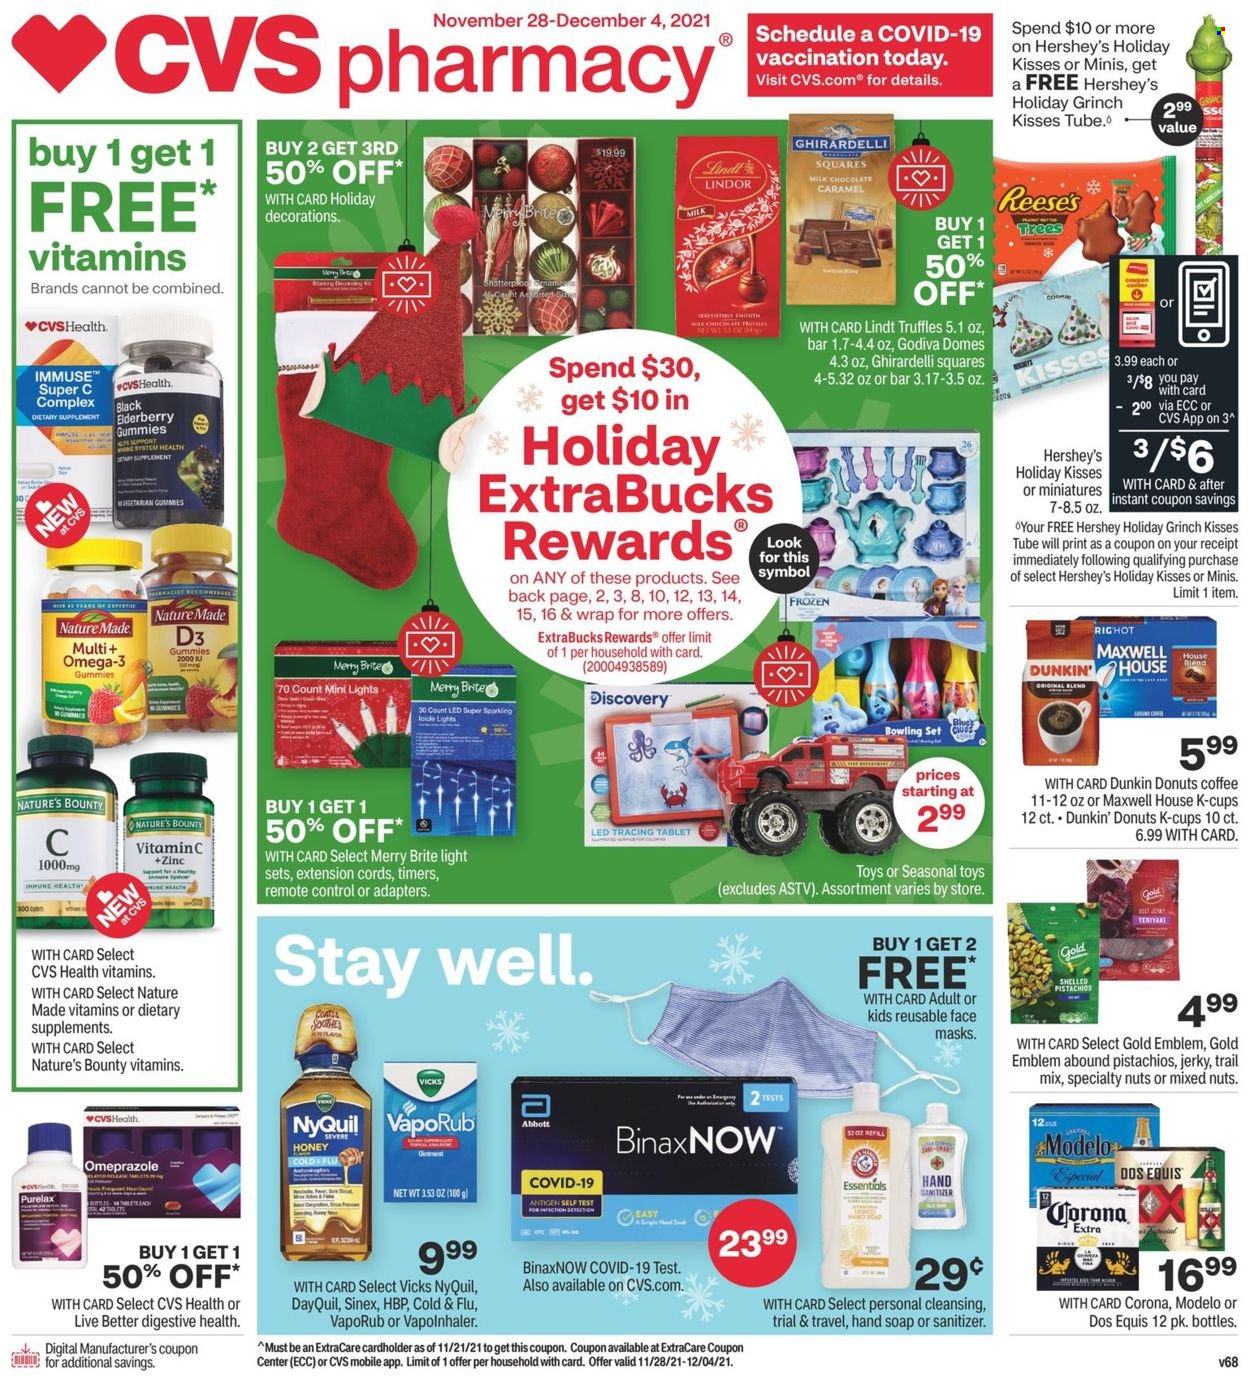 thumbnail - CVS Pharmacy Flyer - 11/28/2021 - 12/04/2021 - Sales products - jerky, Reese's, Hershey's, milk chocolate, chocolate, Lindt, Lindor, truffles, Godiva, Ghirardelli, pistachios, mixed nuts, trail mix, Maxwell House, coffee, coffee capsules, K-Cups, Dunkin' Donuts, hand soap, soap, Purelax, face mask, Brite, Vicks, Select Gold, toys, DayQuil, Cold & Flu, Nature Made, Nature's Bounty, vitamin c, NyQuil, Omega-3, zinc, VapoRub, vitamin D3, Sinex, dietary supplement, beer, Corona Extra, Modelo, Dos Equis. Page 1.